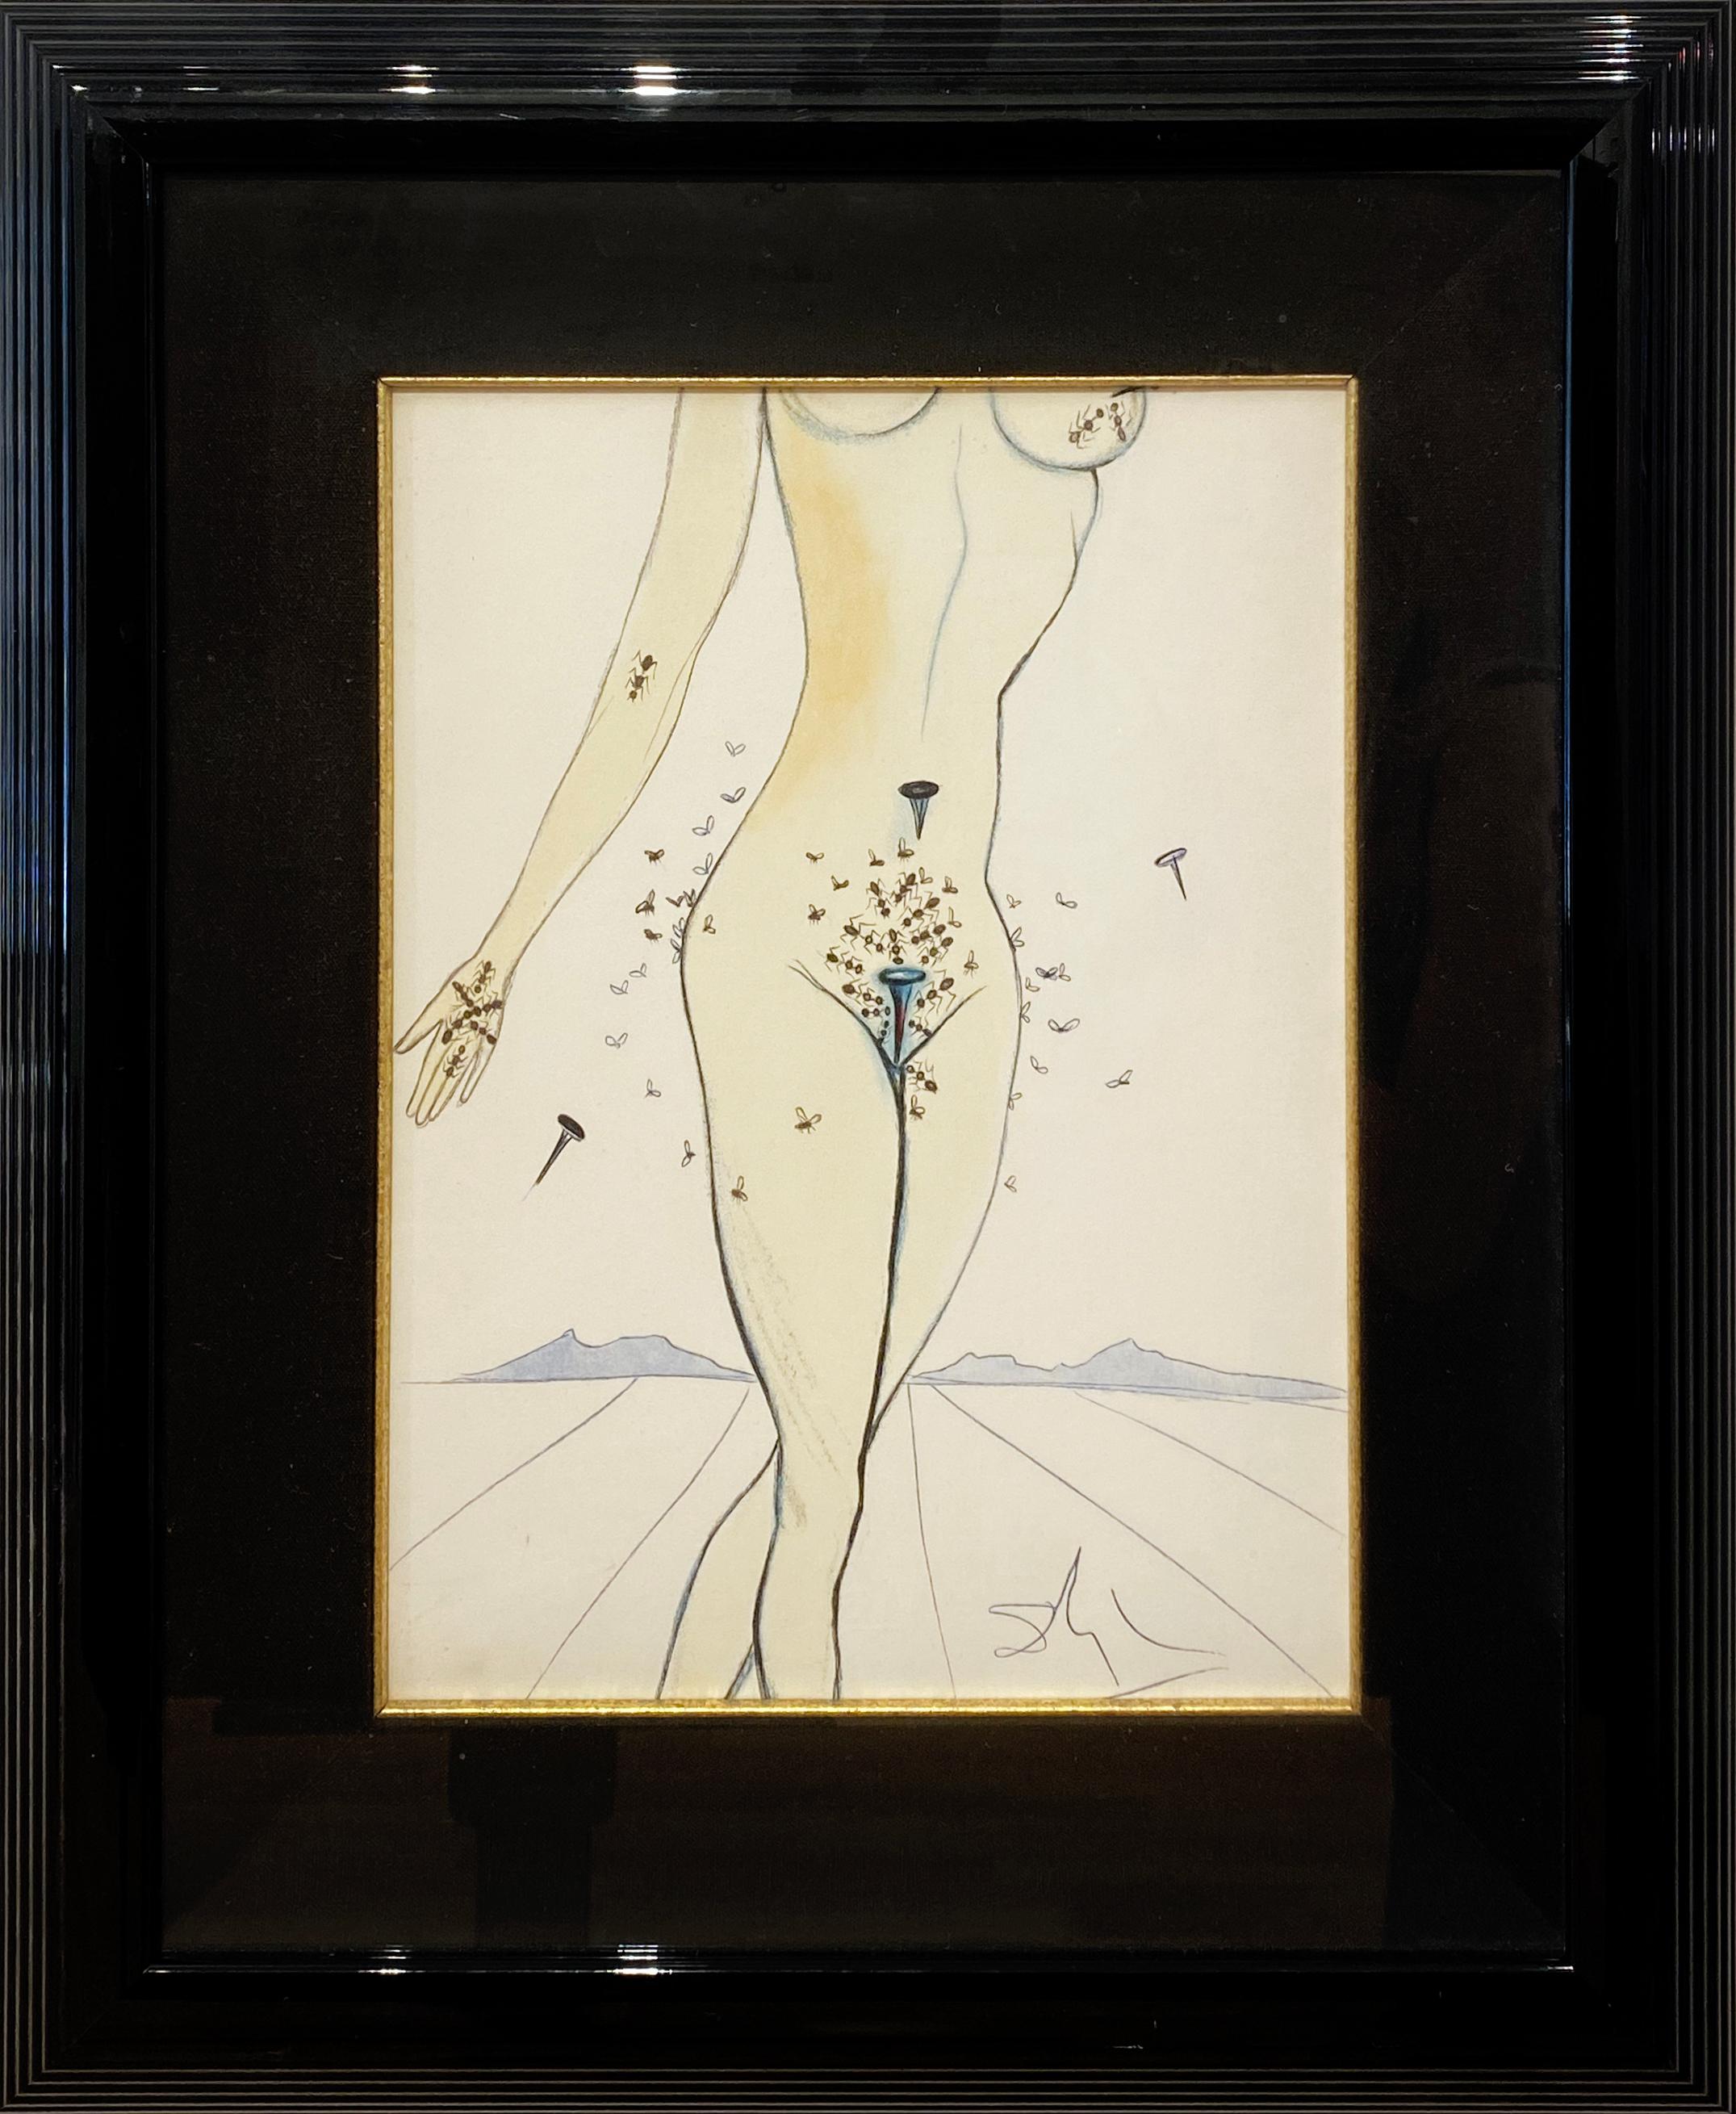 Ants, Snails, and Flies on Nude - Print by Salvador Dalí